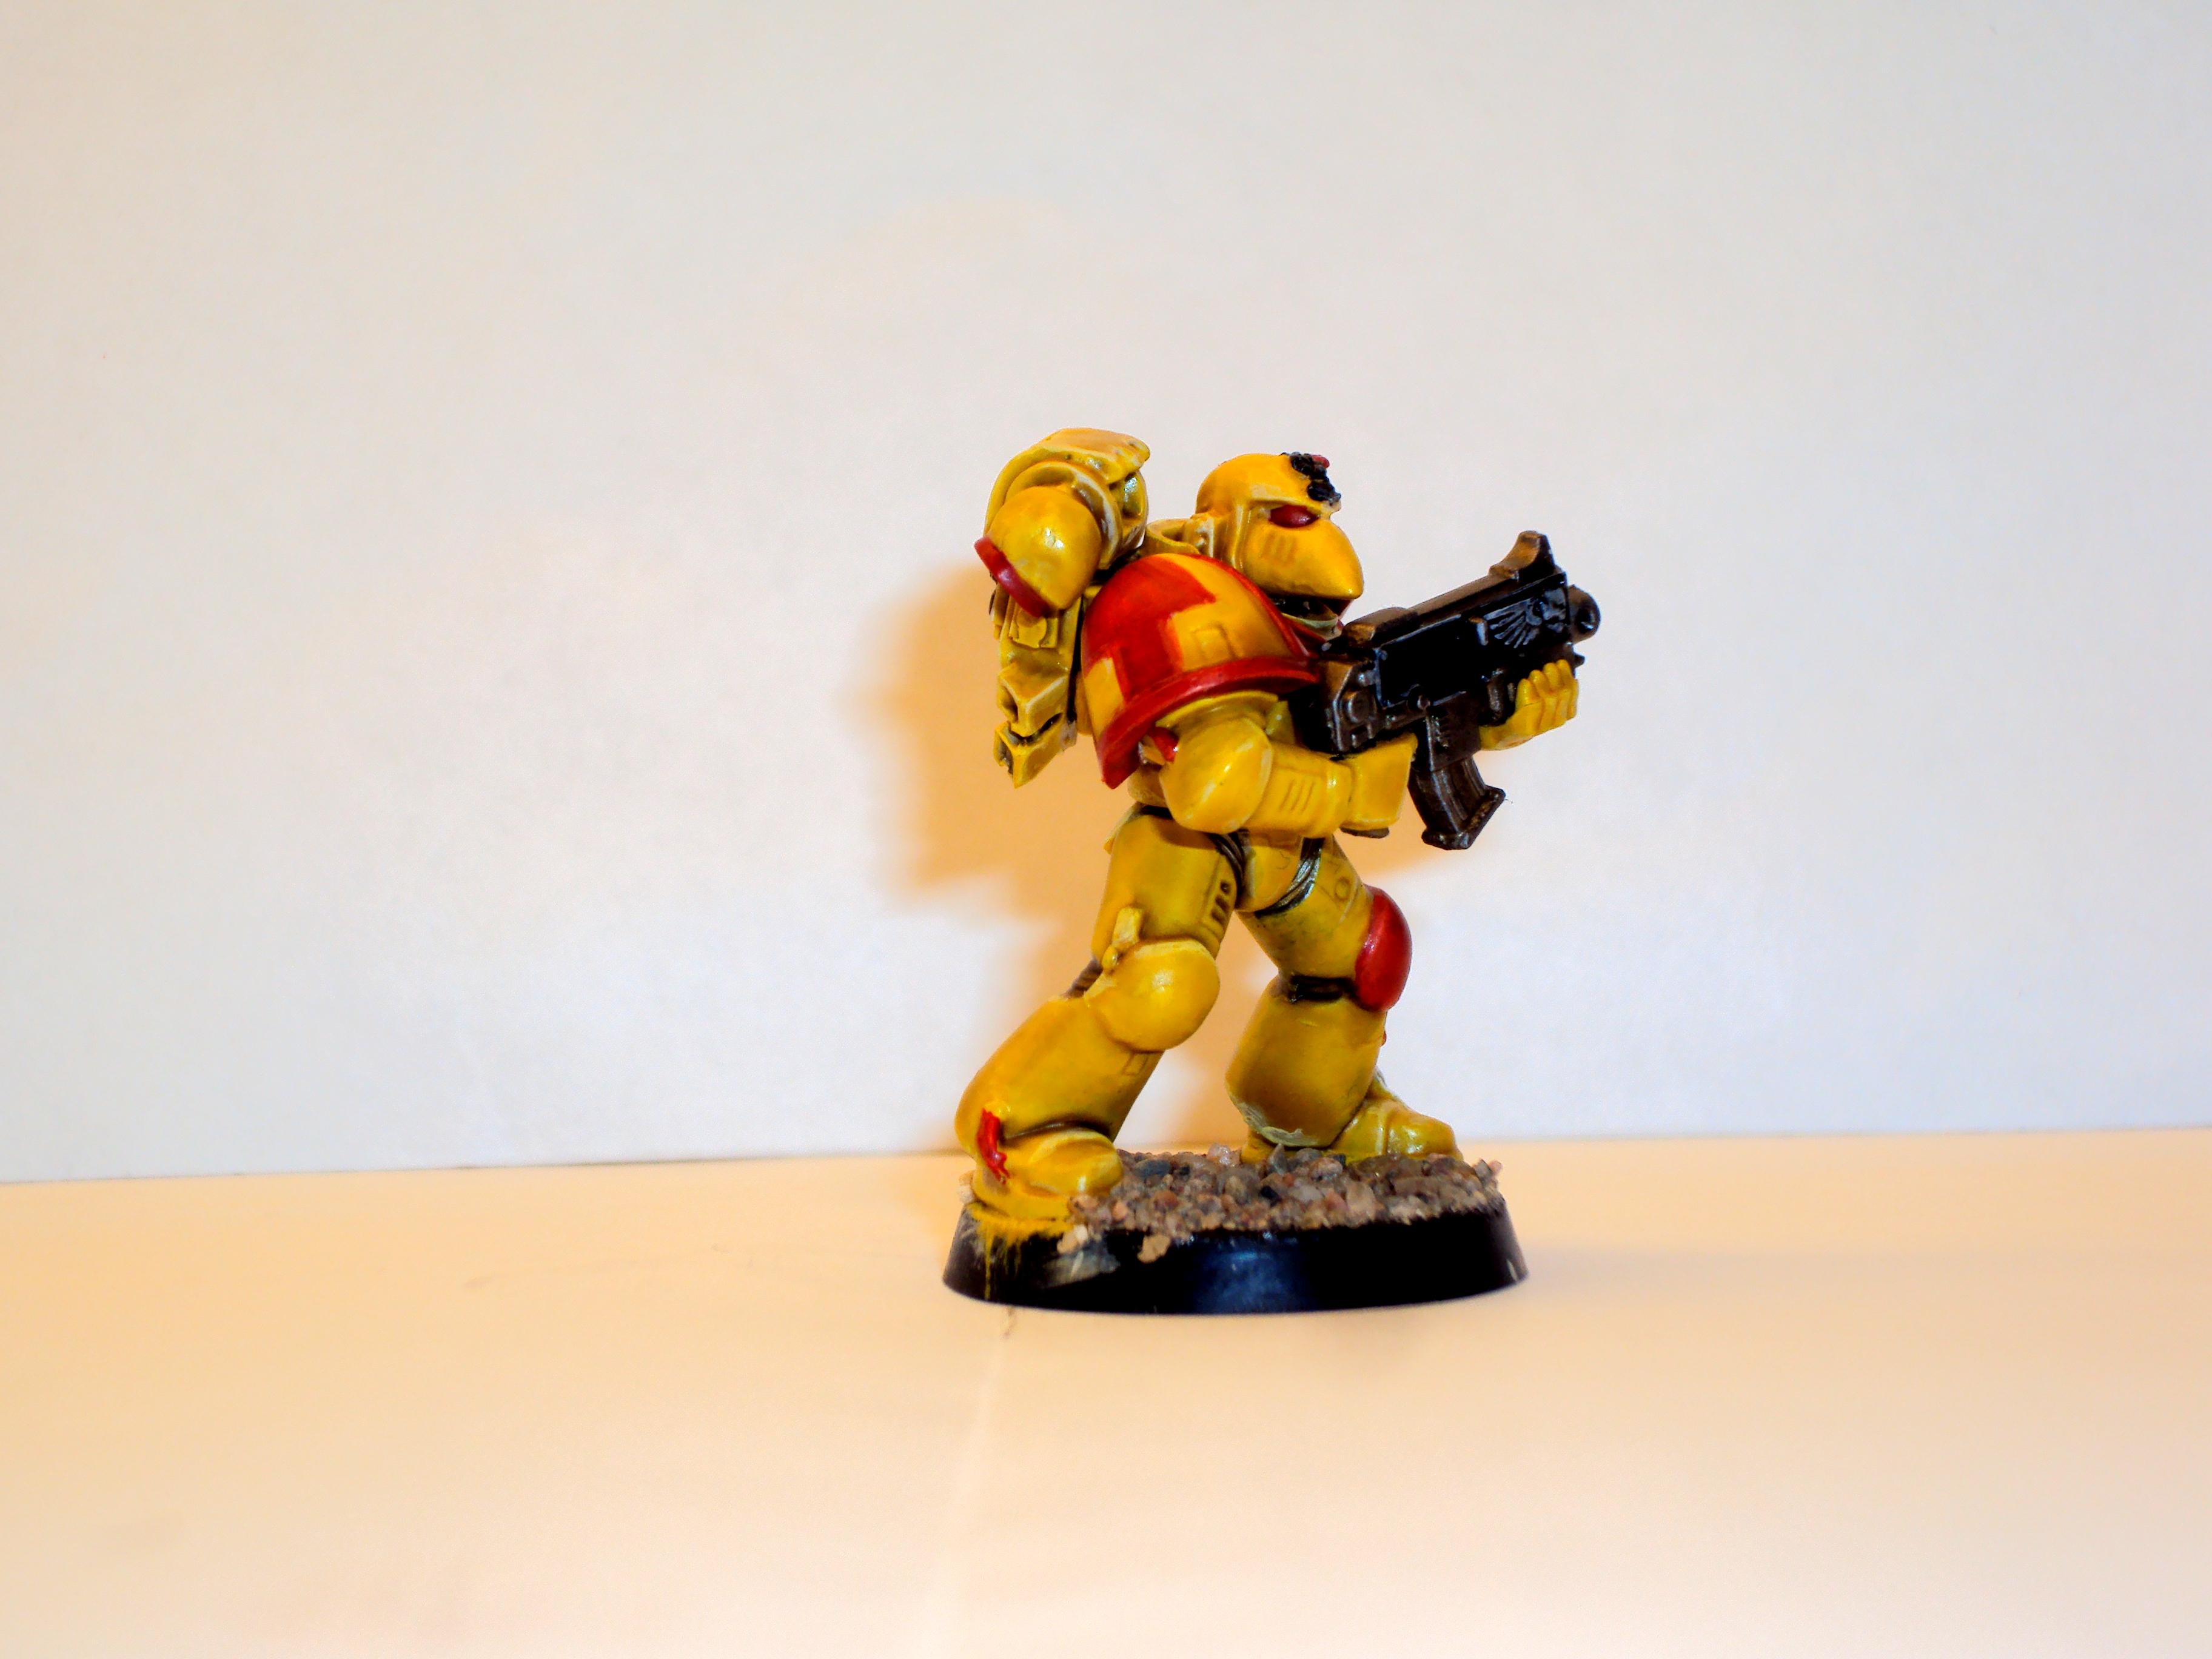 Imperial fist 5